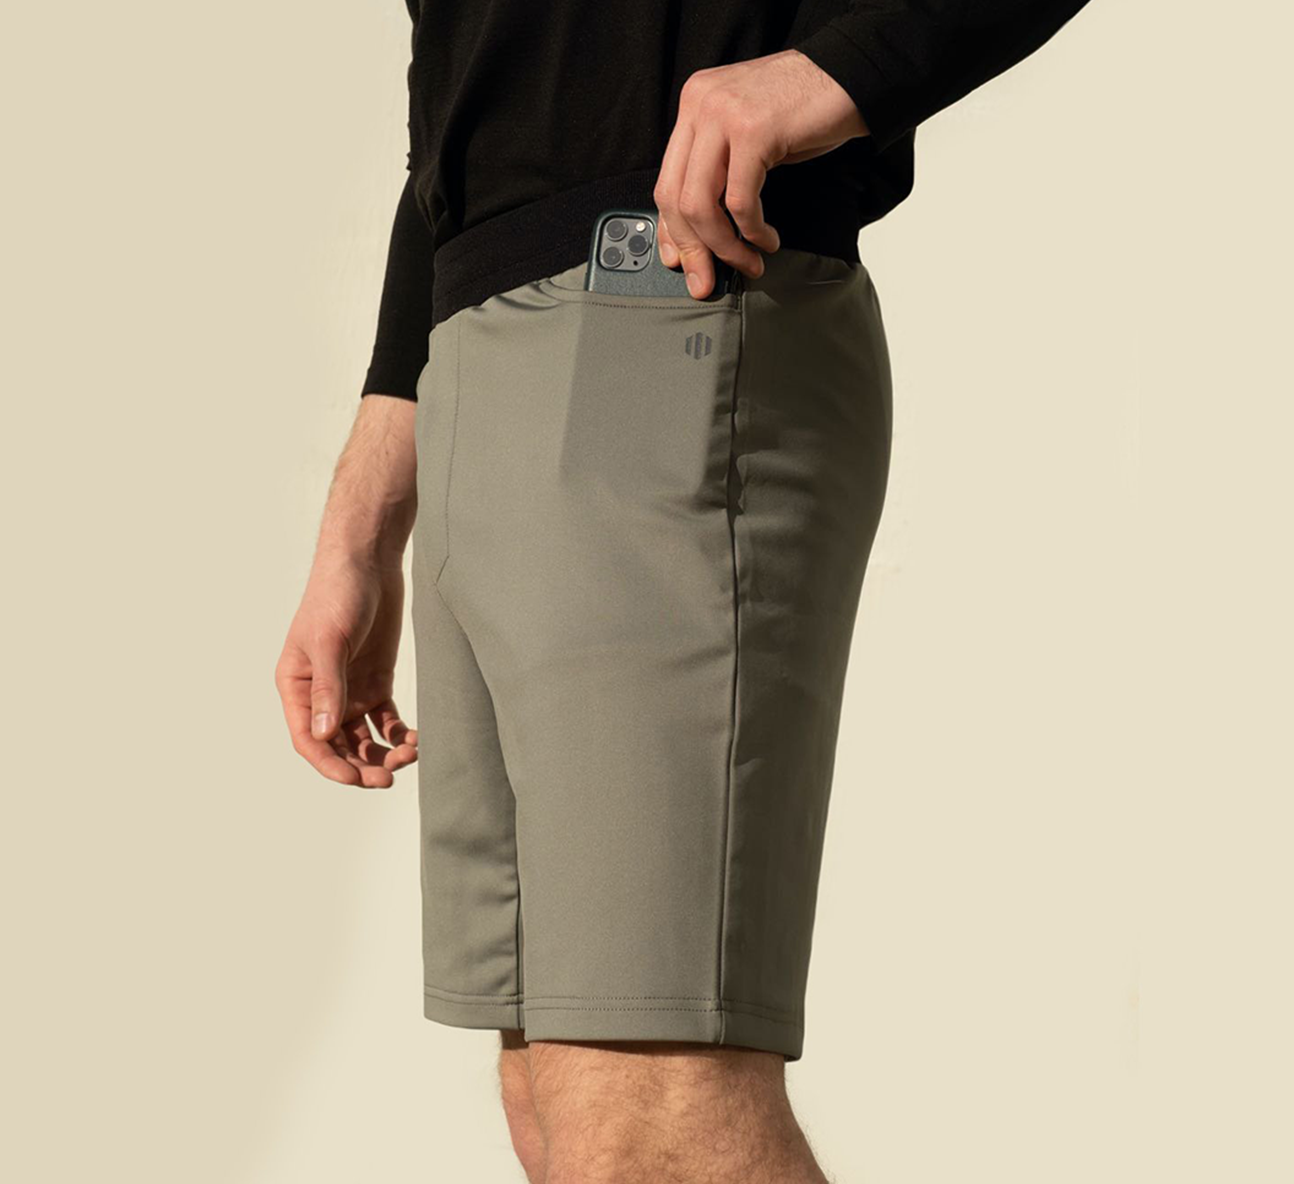 Mens athletic shorts with pockets